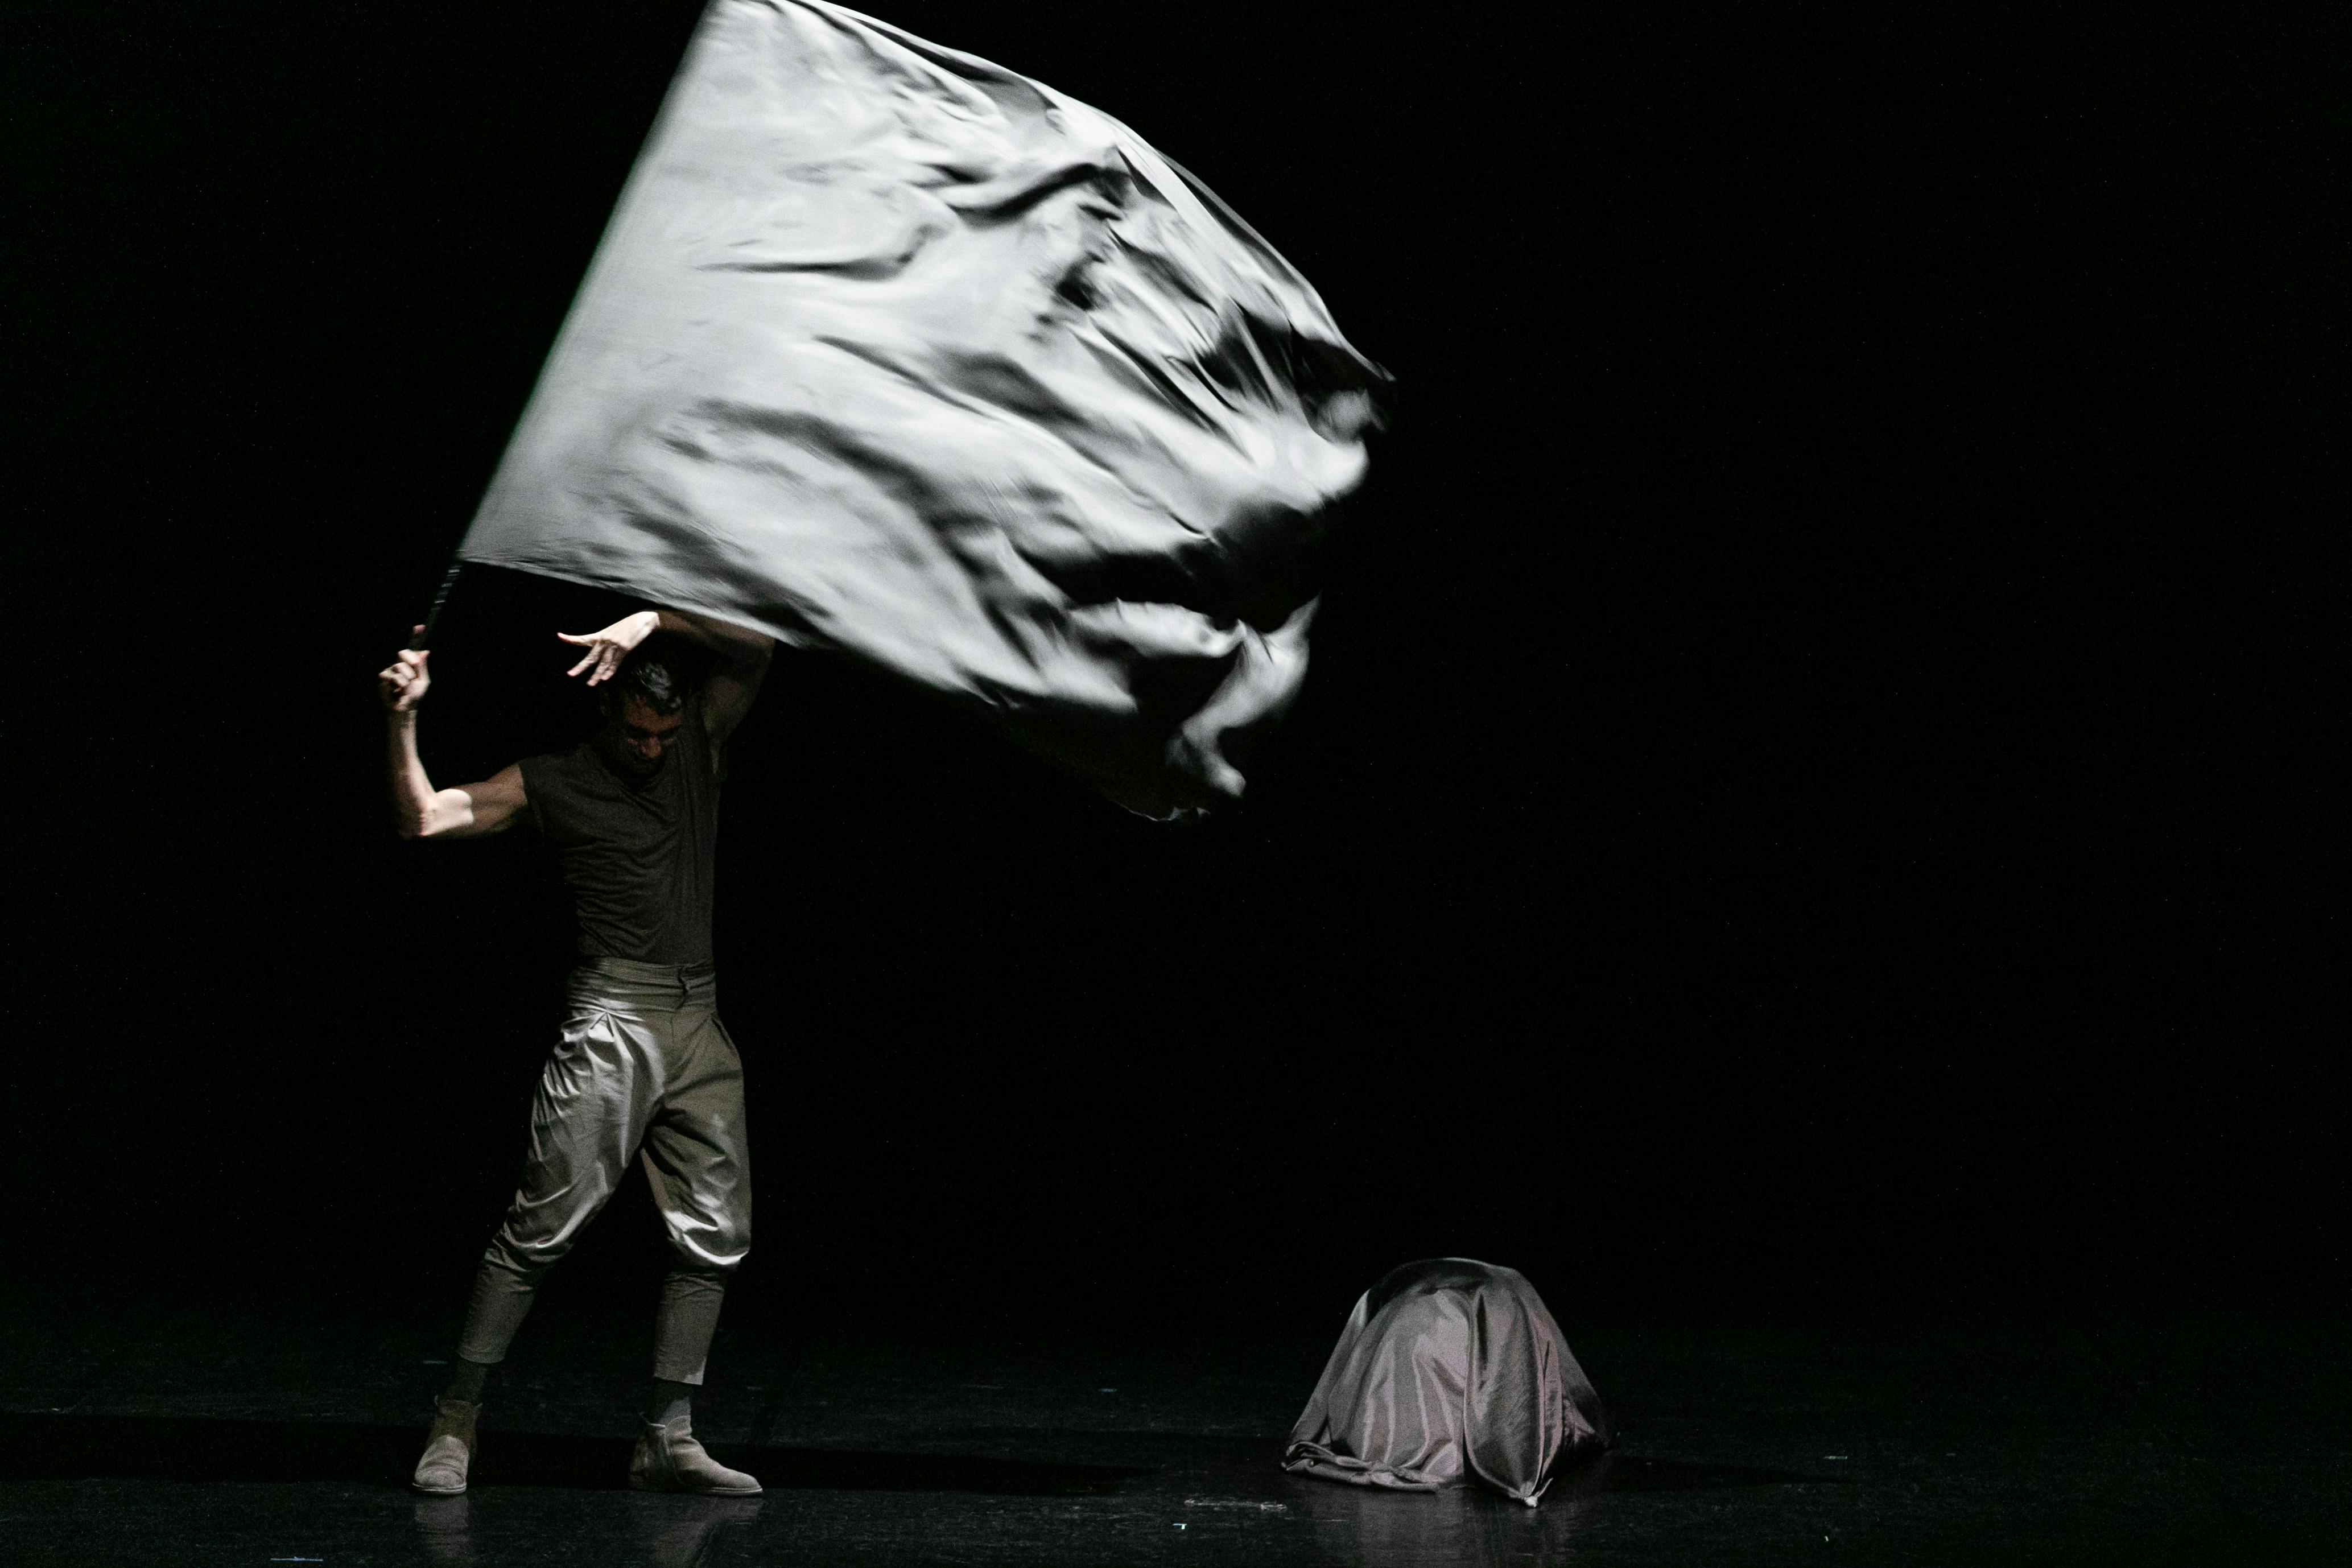 The artist performs on stage wearing dark clothes and waving a grey flag